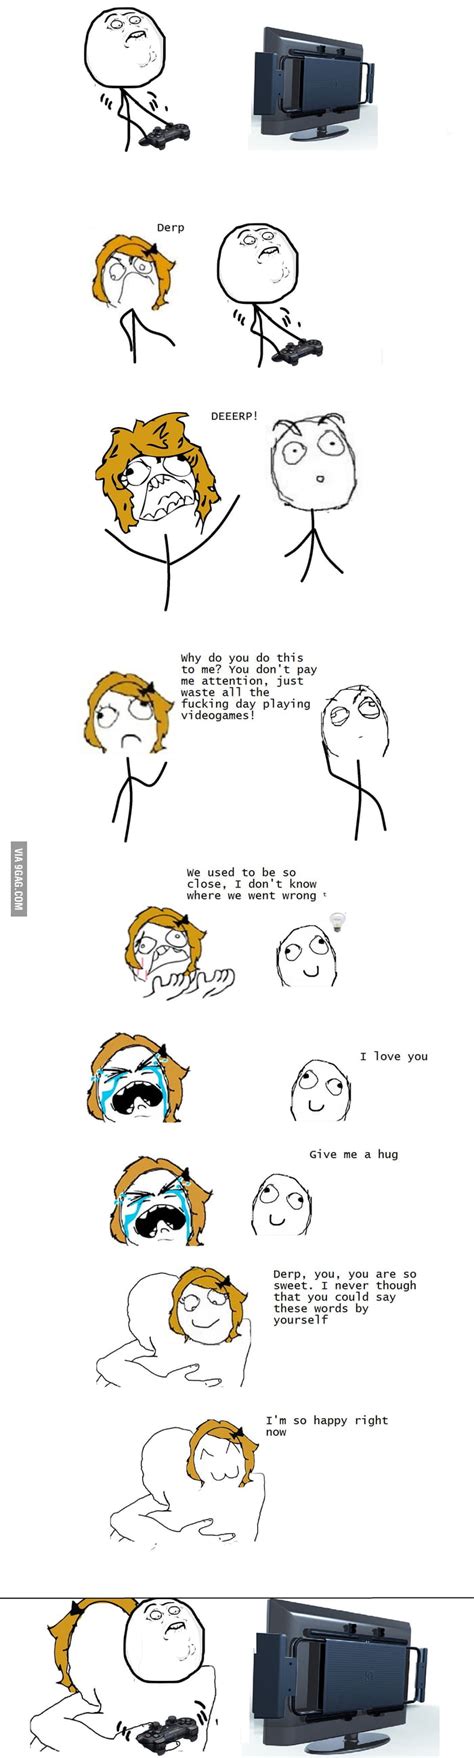 Just Derp And Derpina 9gag